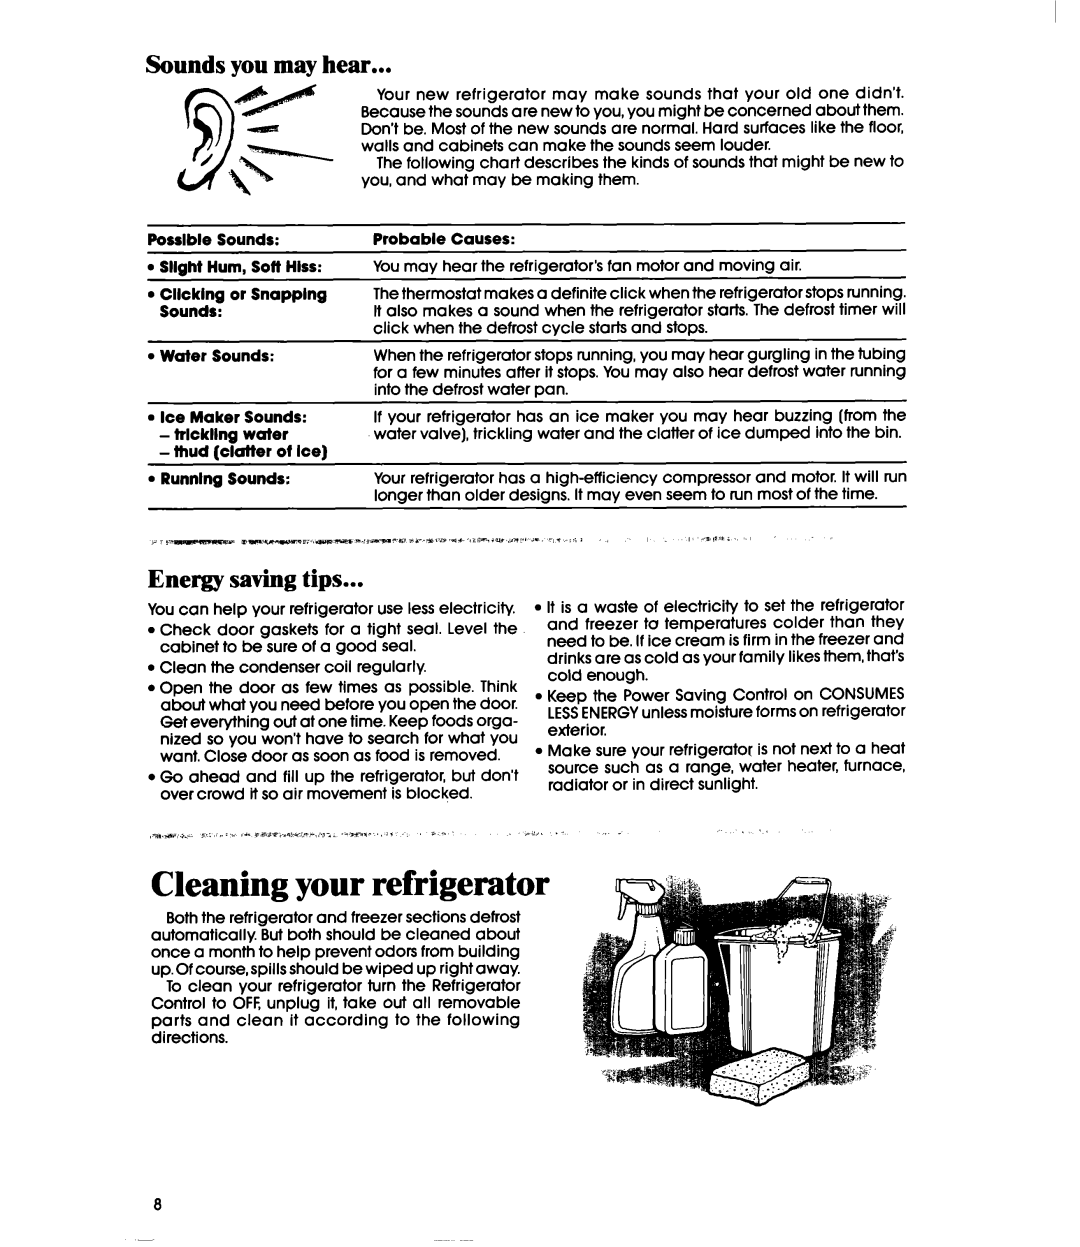 Whirlpool ETl4JM manual Cleaning your refrigerator, Sounds you may hear, Energy saving tips 